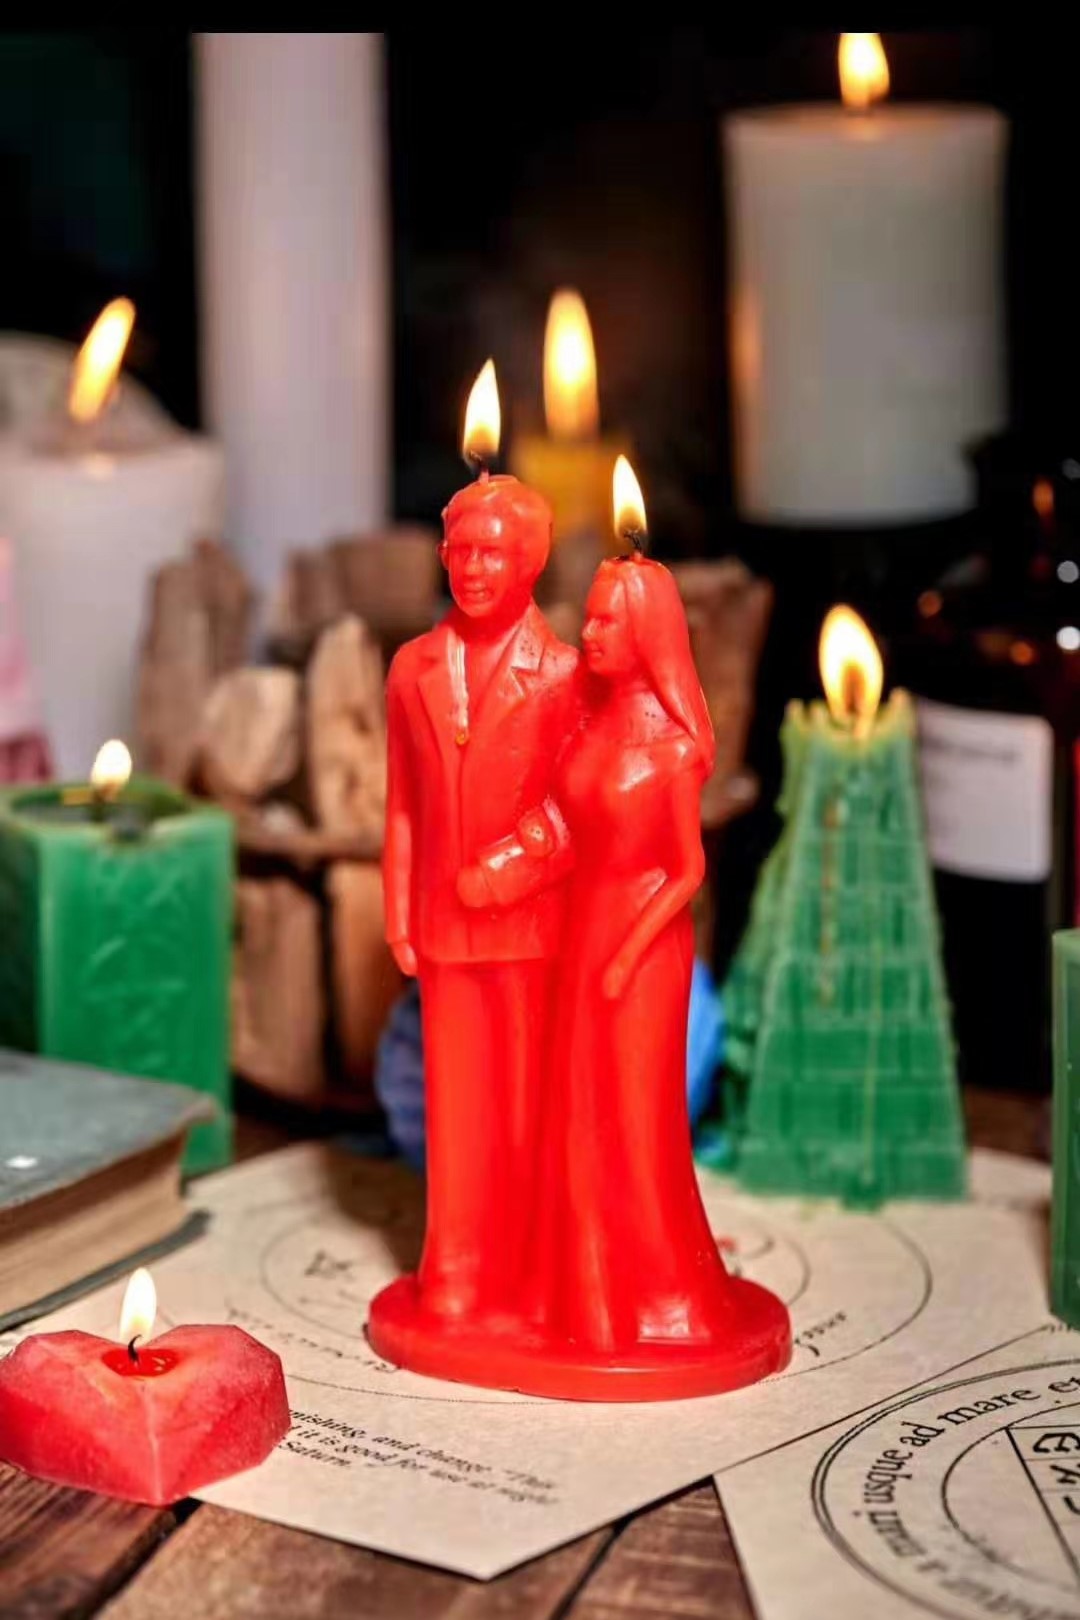 Memorial Candles：Man Woman Body Figure , Beeswax Sculpture ,Wedding ,Memorial Day ,China Factory ,Price-HOWCANDLE-Candles,Scented Candles,Aromatherapy Candles,Soy Candles,Vegan Candles,Jar Candles,Pillar Candles,Candle Gift Sets,Essential Oils,Reed Diffuser,Candle Holder,